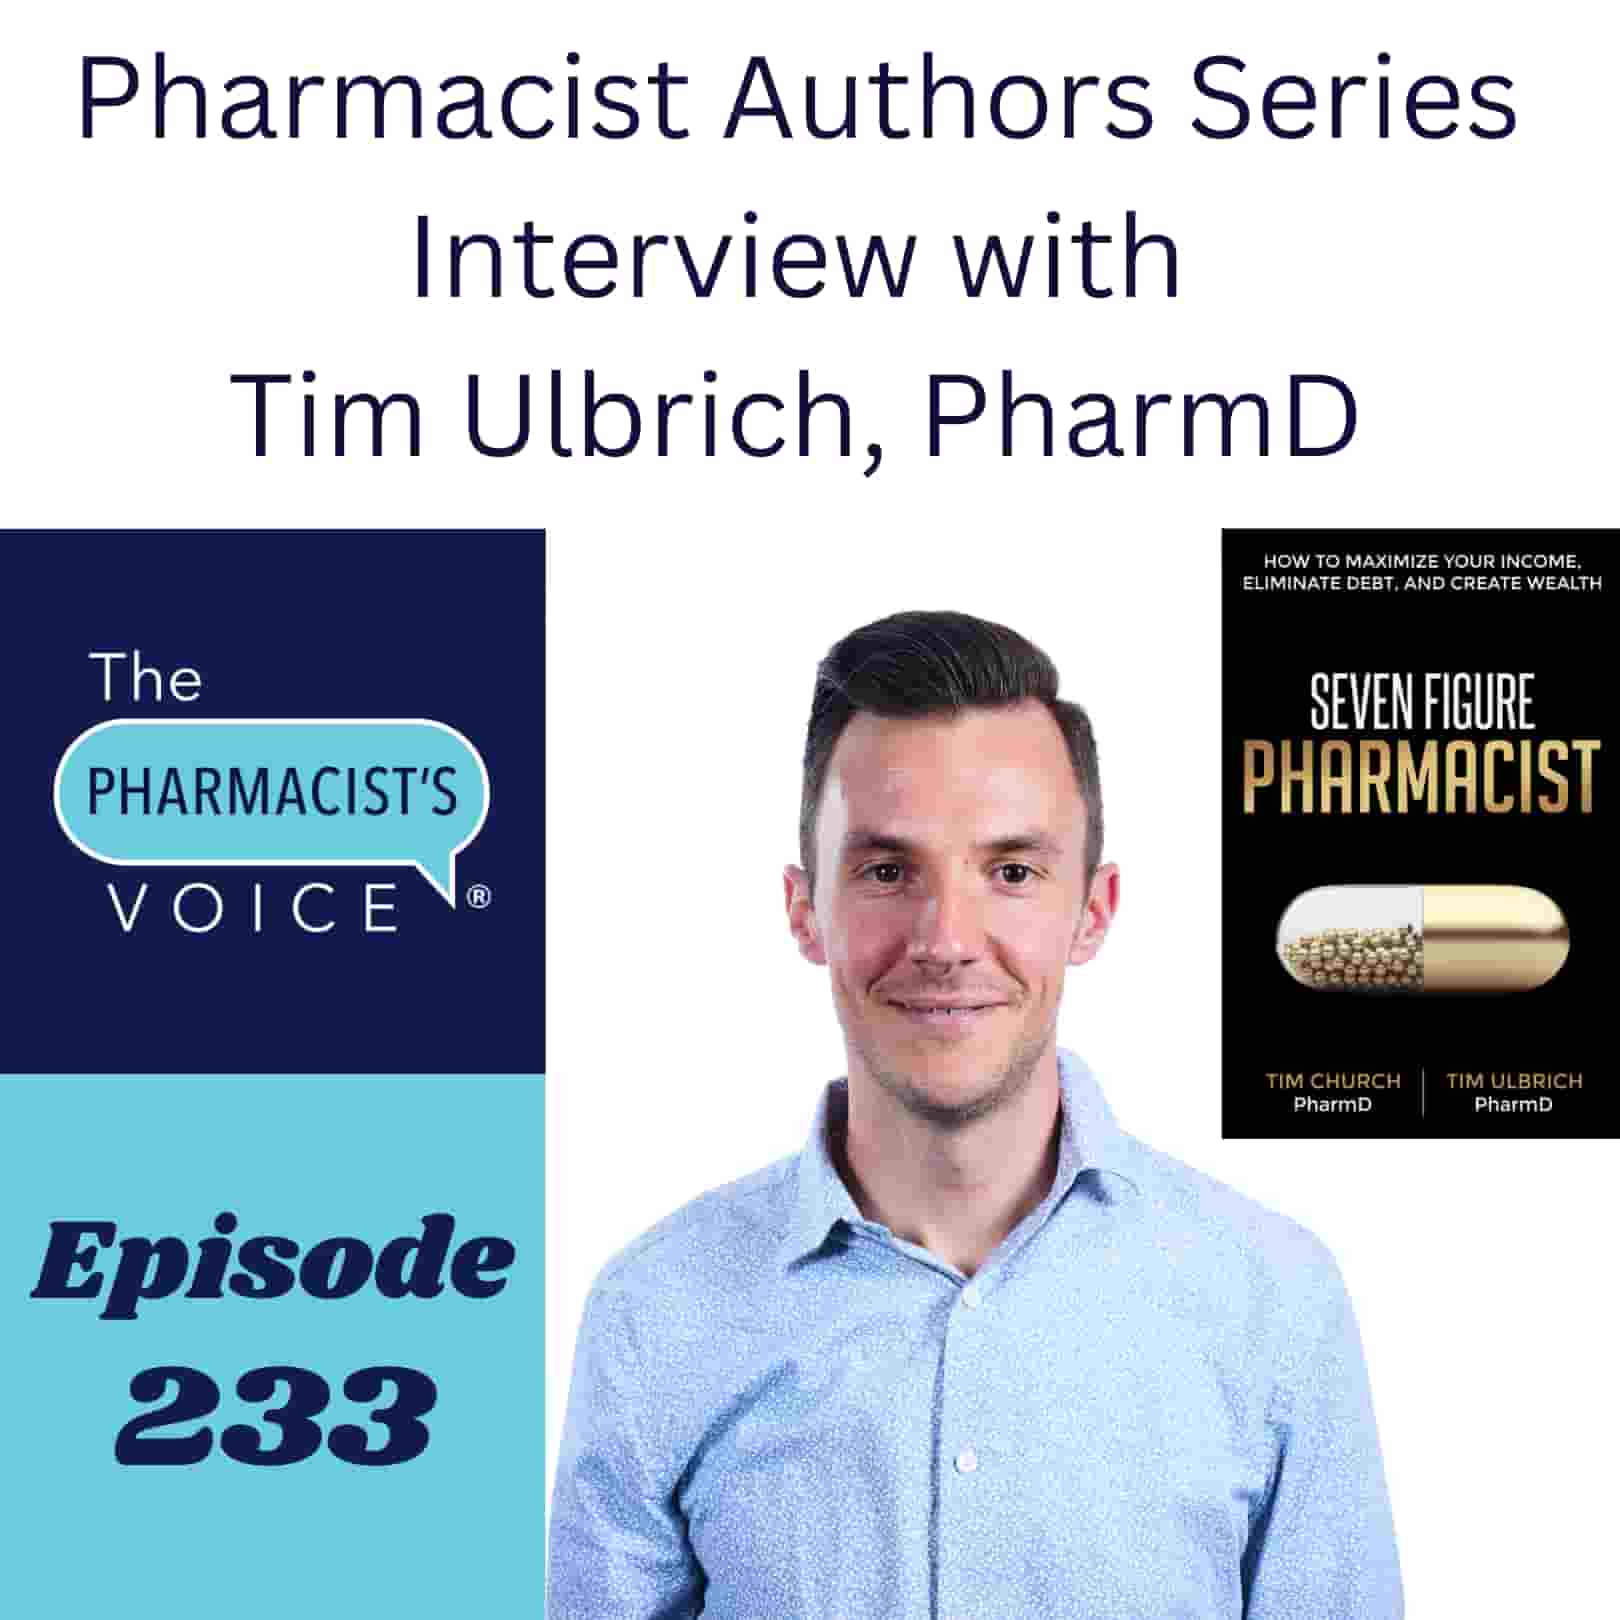 Pharmacist Authors Series Interview with Tim Ulbrich, PharmD. The Pharmacist's Voice Podcast Episode 233.